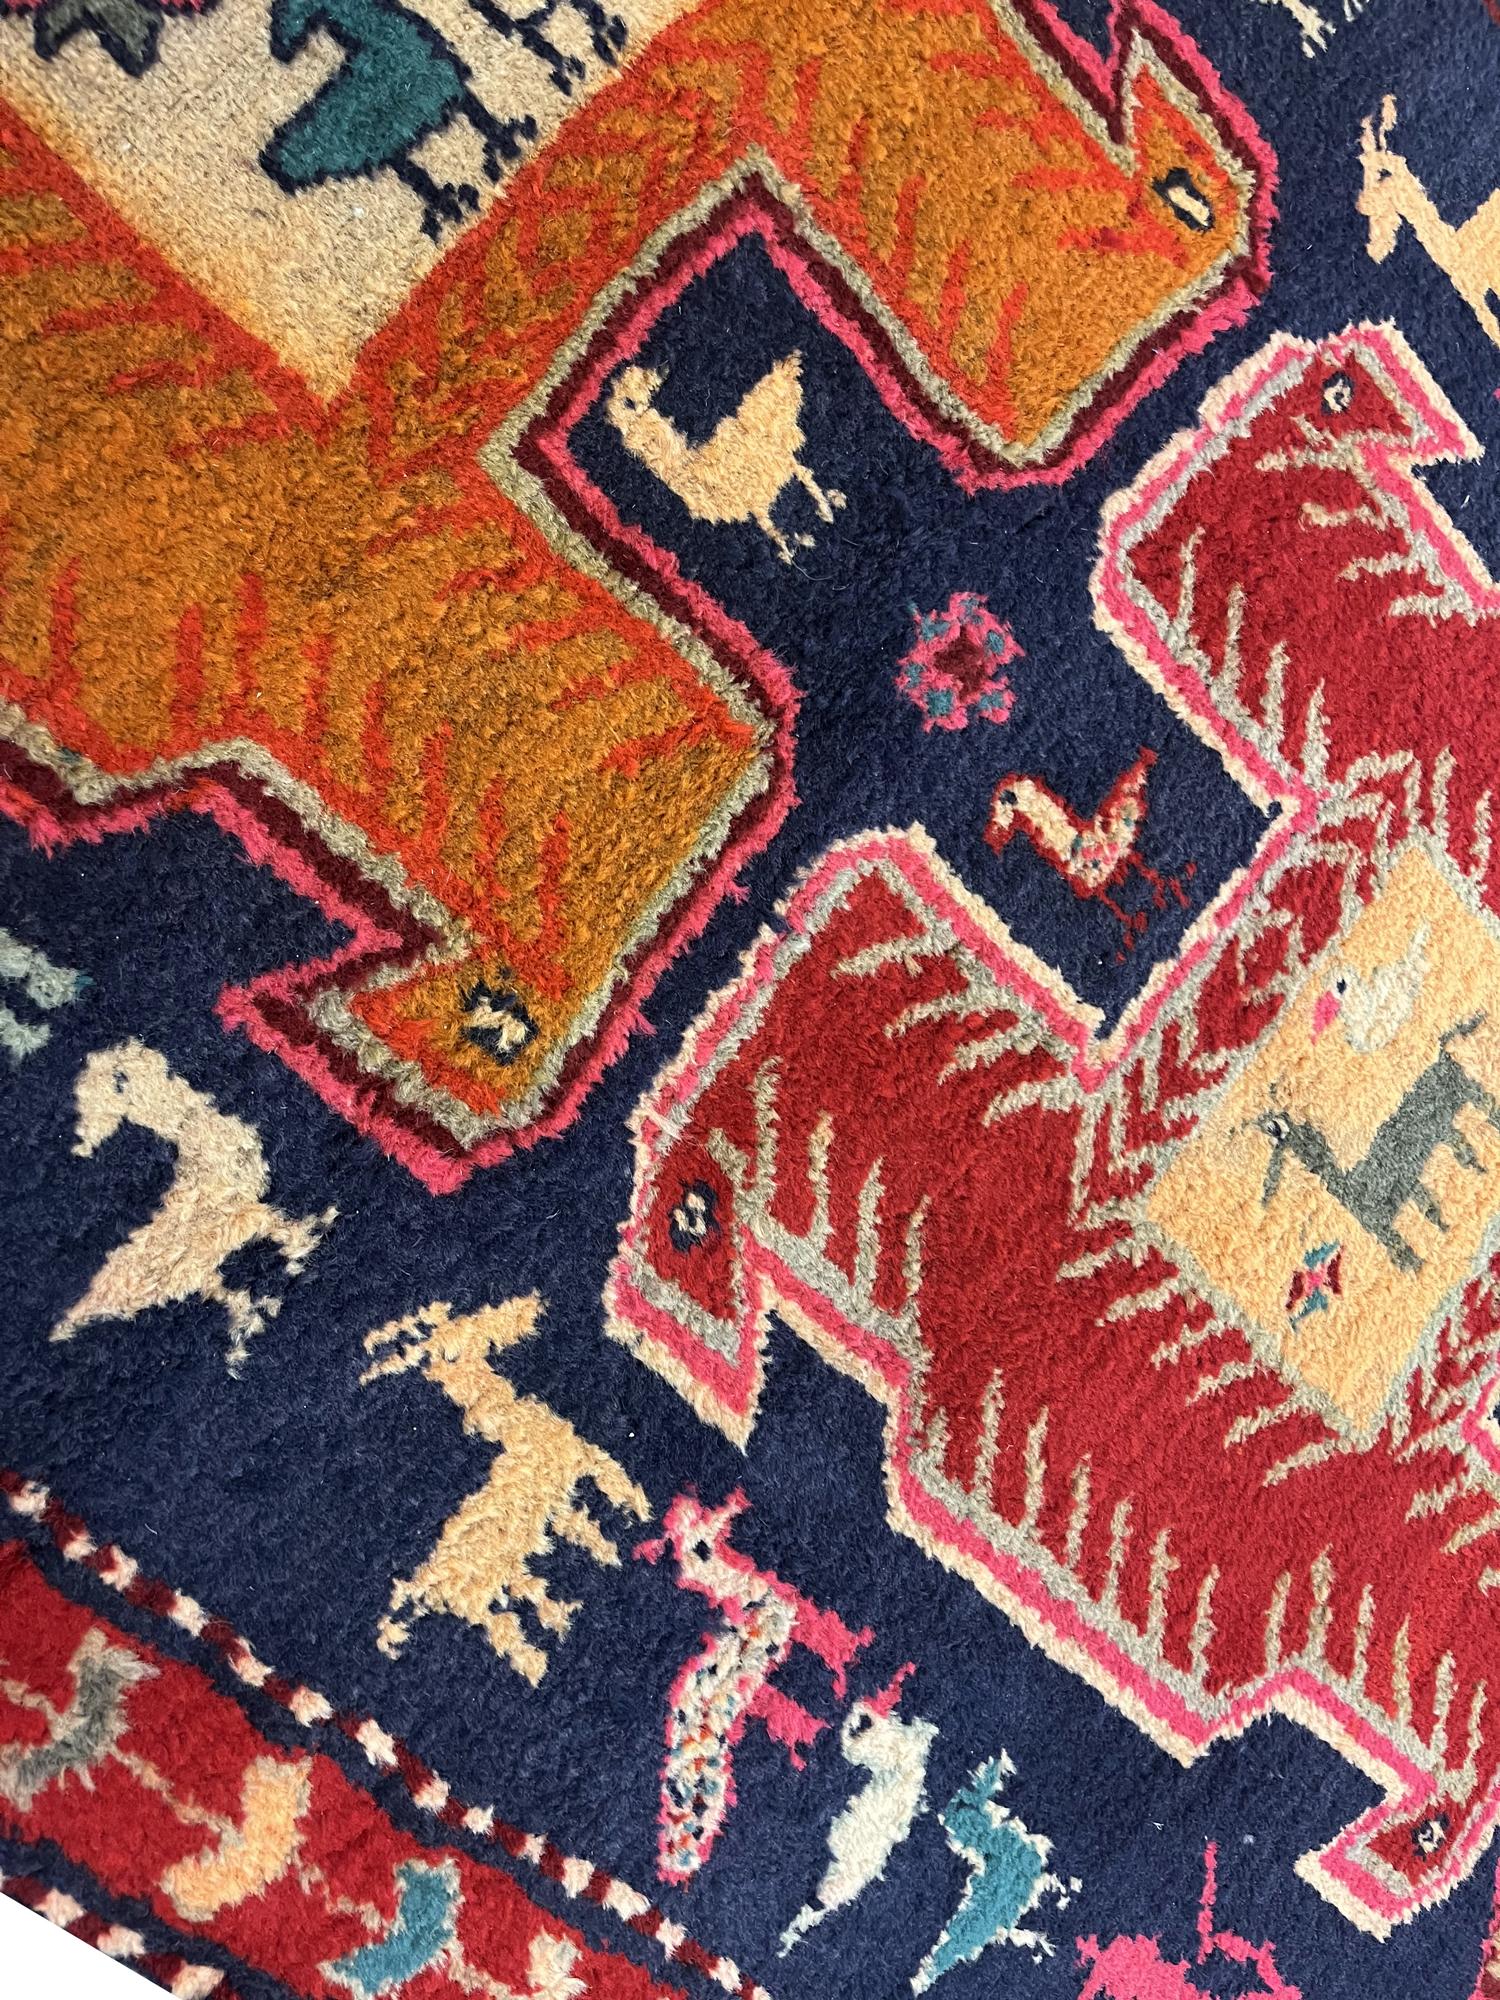 This oriental wool runner rug is an excellent example of tribal carpets woven in the 1960s. The design features a traditional medallion design, woven on a deep blue background with accents of red, rust, green and beige. The conventional design and